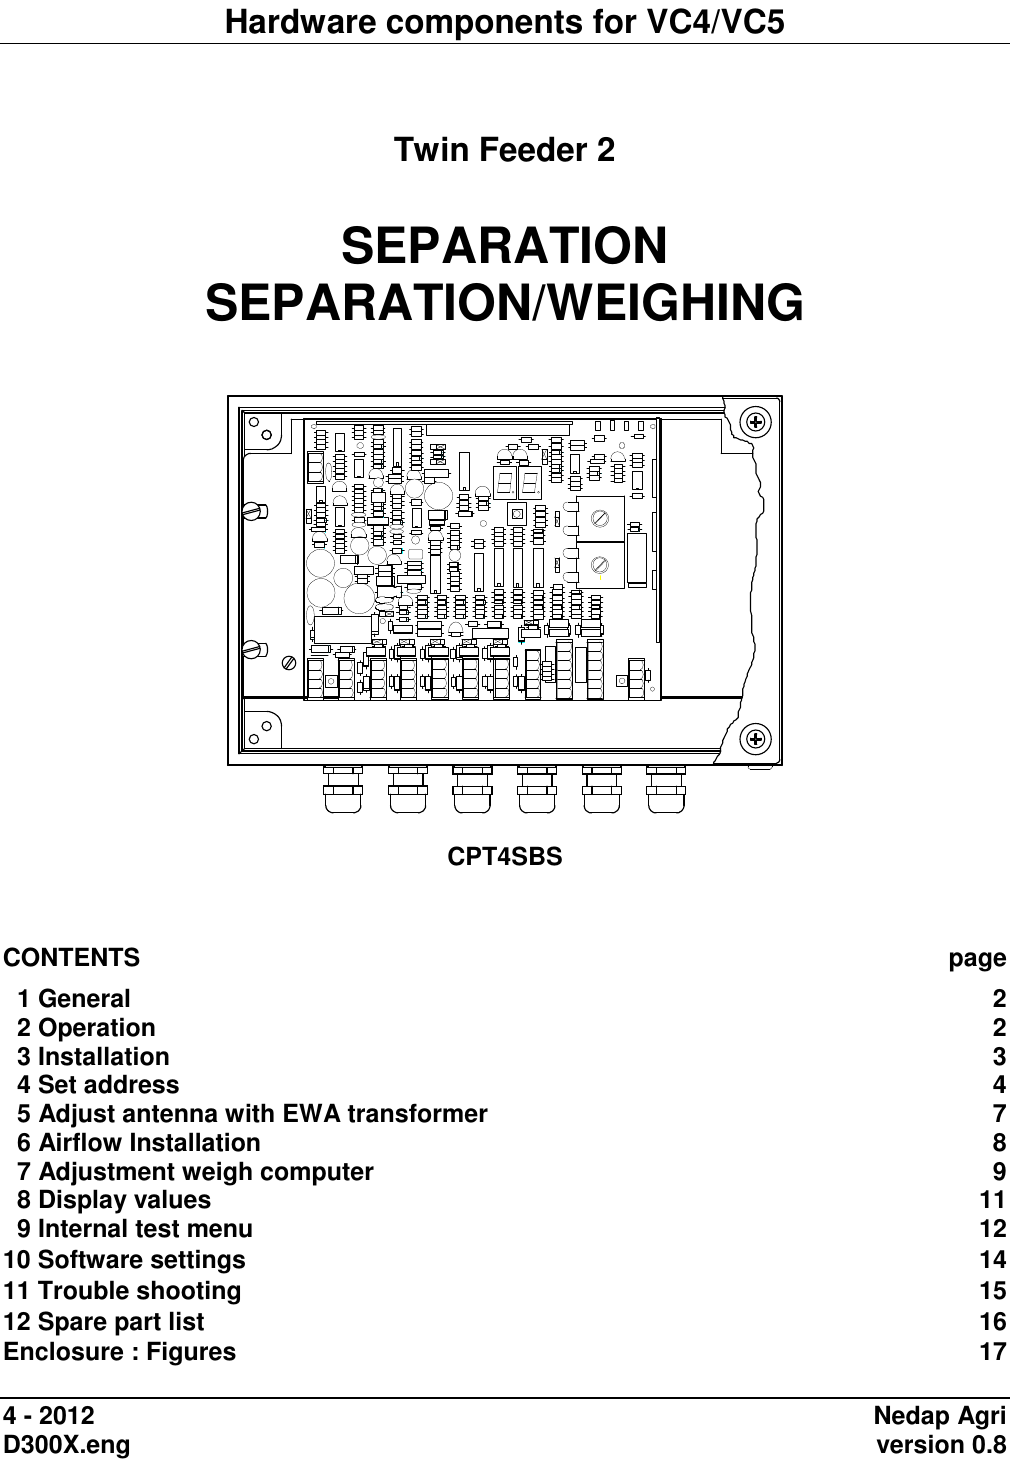 Hardware components for VC4/VC5   Twin Feeder 2  SEPARATION SEPARATION/WEIGHING     CPT4SBS    CONTENTS  page   1 General  2   2 Operation  2   3 Installation  3   4 Set address  4   5 Adjust antenna with EWA transformer  7   6 Airflow Installation  8   7 Adjustment weigh computer  9   8 Display values  11   9 Internal test menu  12 10 Software settings  14 11 Trouble shooting  15 12 Spare part list  16 Enclosure : Figures  17  4 - 2012  Nedap Agri D300X.eng    version 0.8 